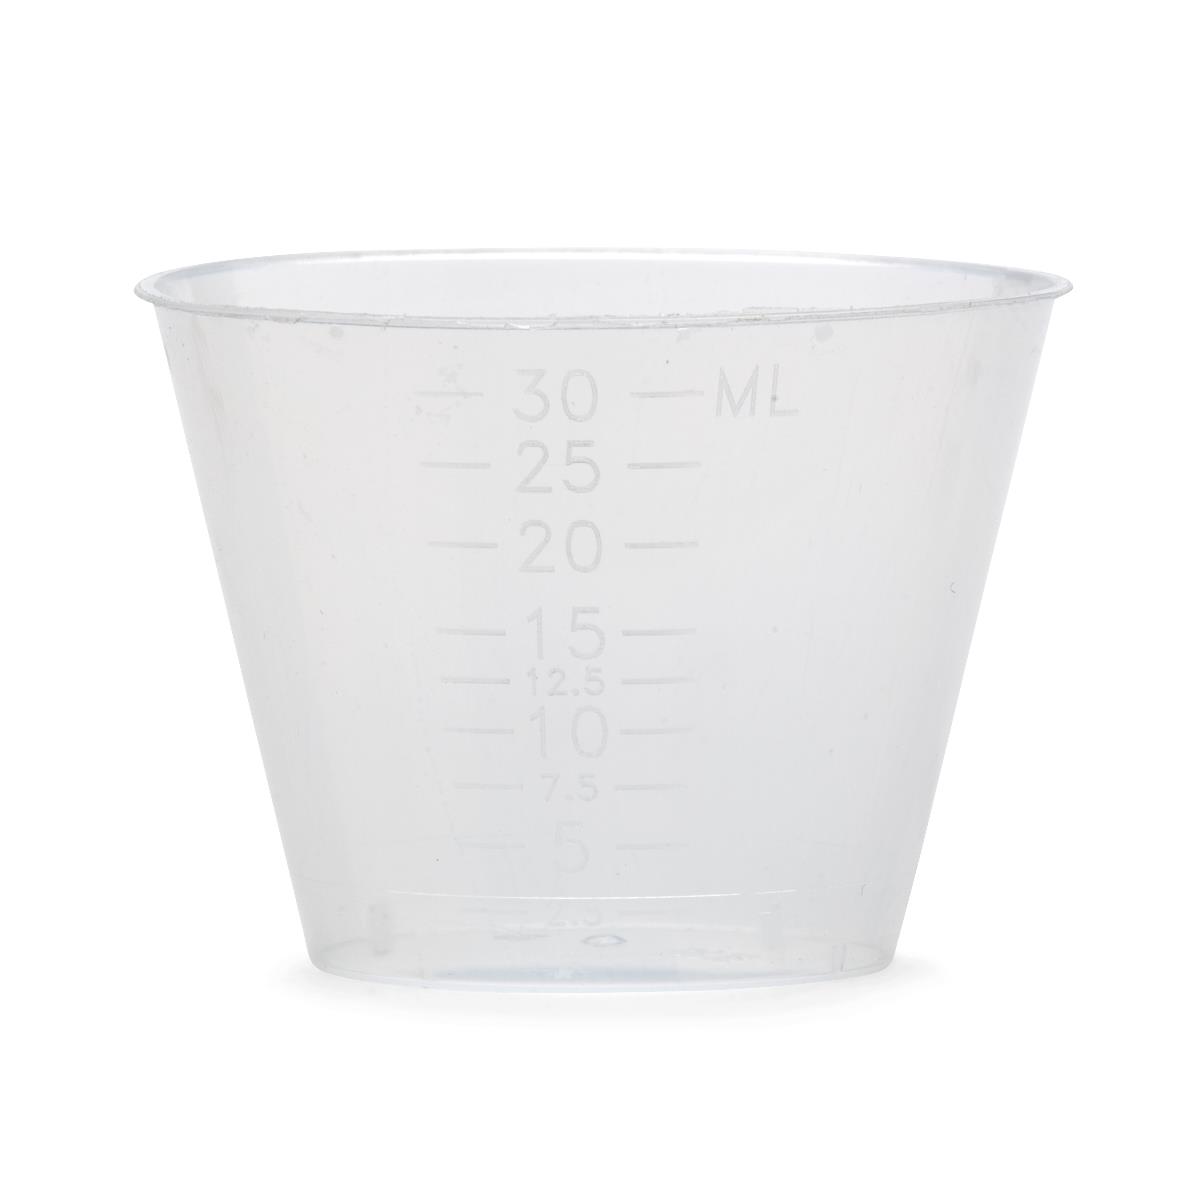 Medicine Mixing Cups – Top Quality Manufacturing